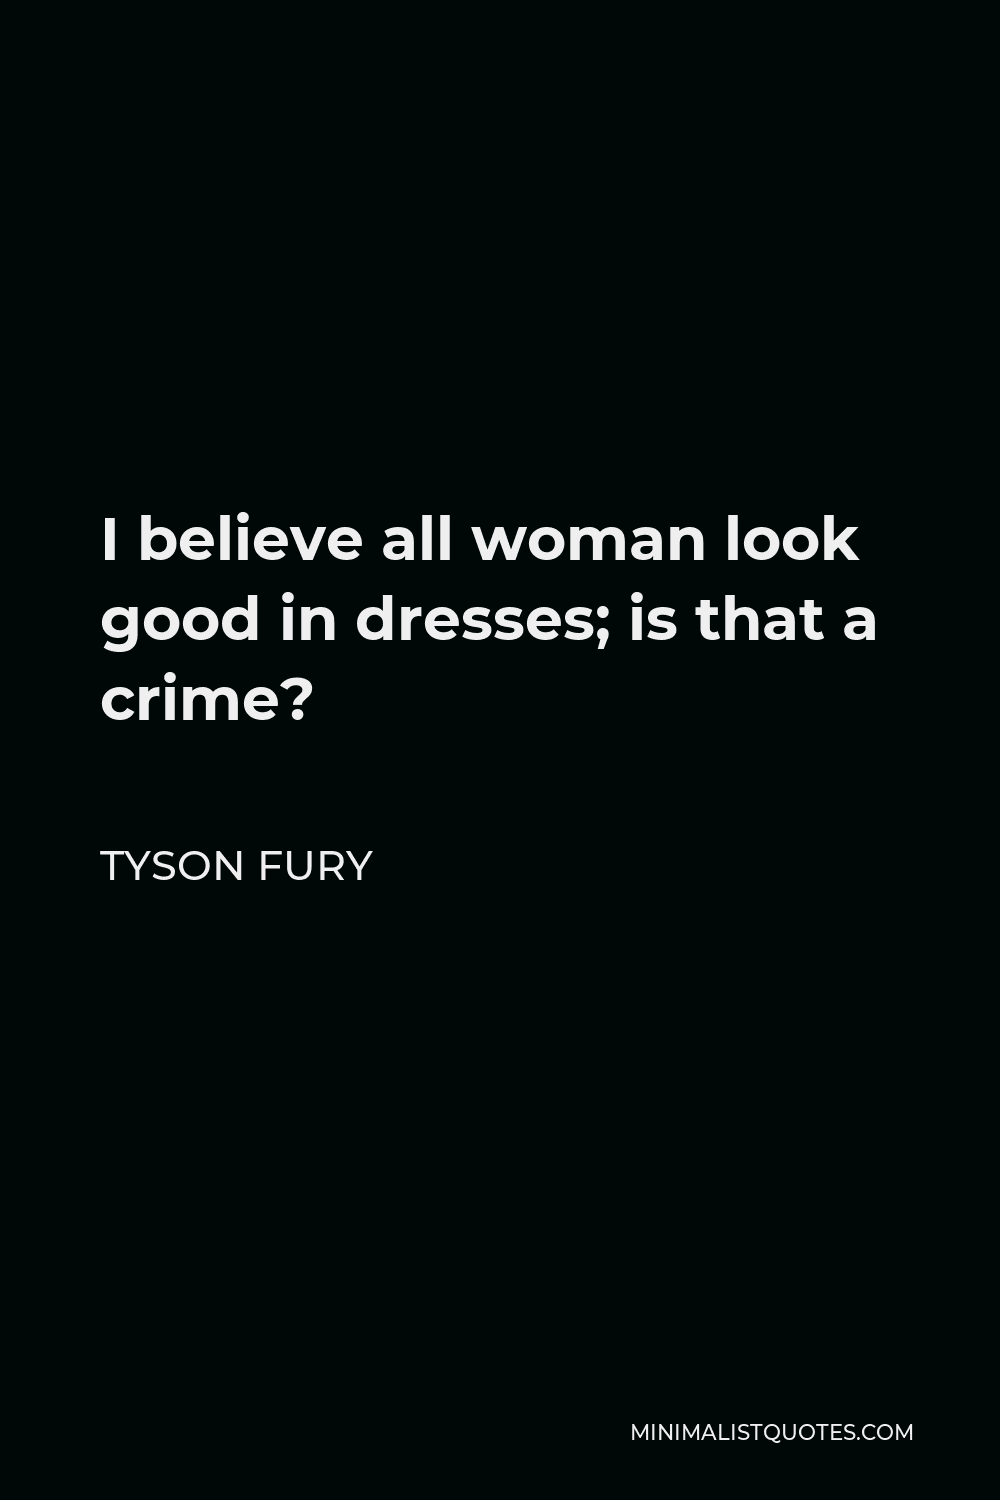 Tyson Fury Quote - I believe all woman look good in dresses; is that a crime?